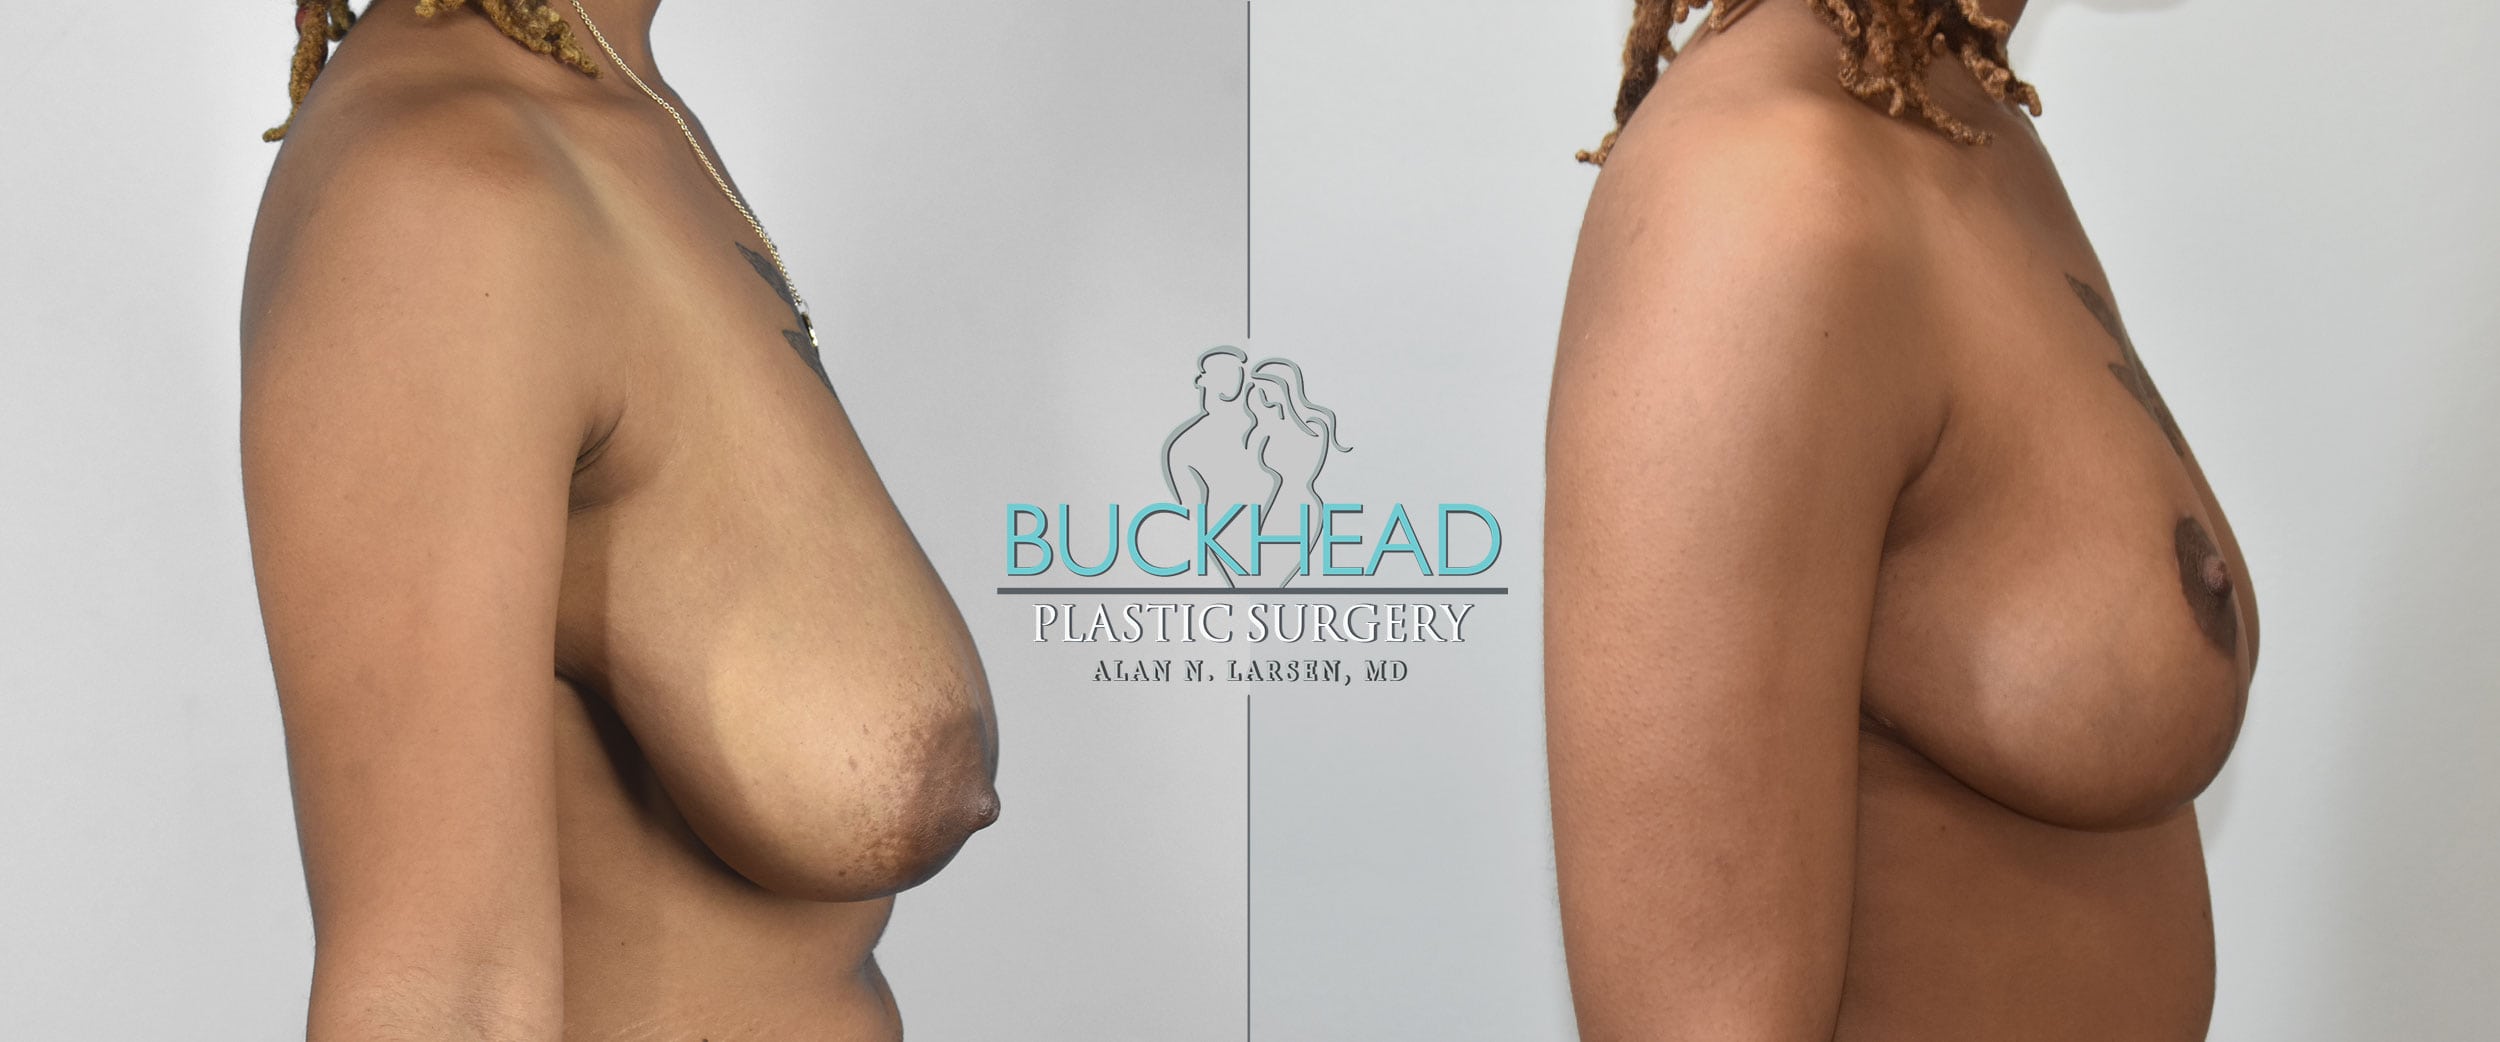 Before and After Photo Gallery | Breast Reduction | Buckhead Plastic Surgery | Alan N. Larsen, MD | Double Board-Certified Plastic Surgeon | Atlanta GA